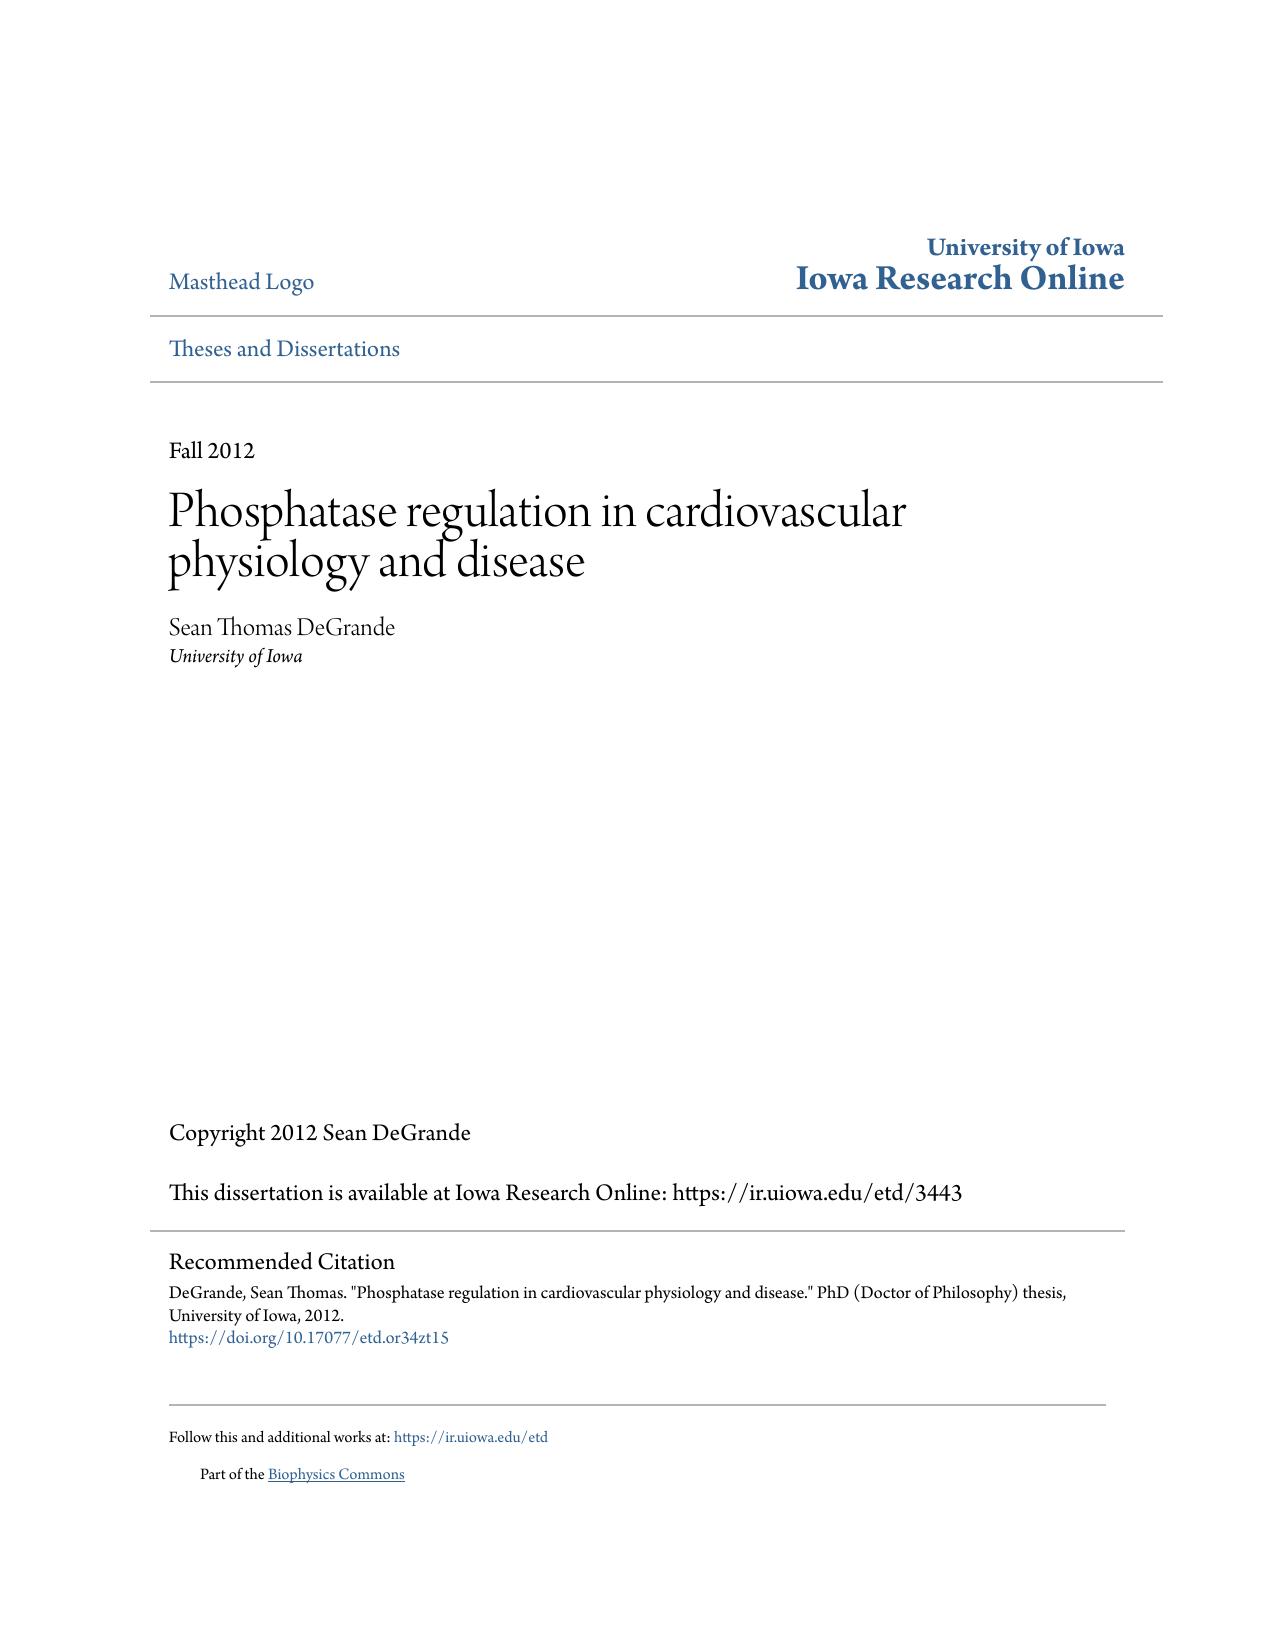 Phosphatase regulation in cardiovascular physiology and disease